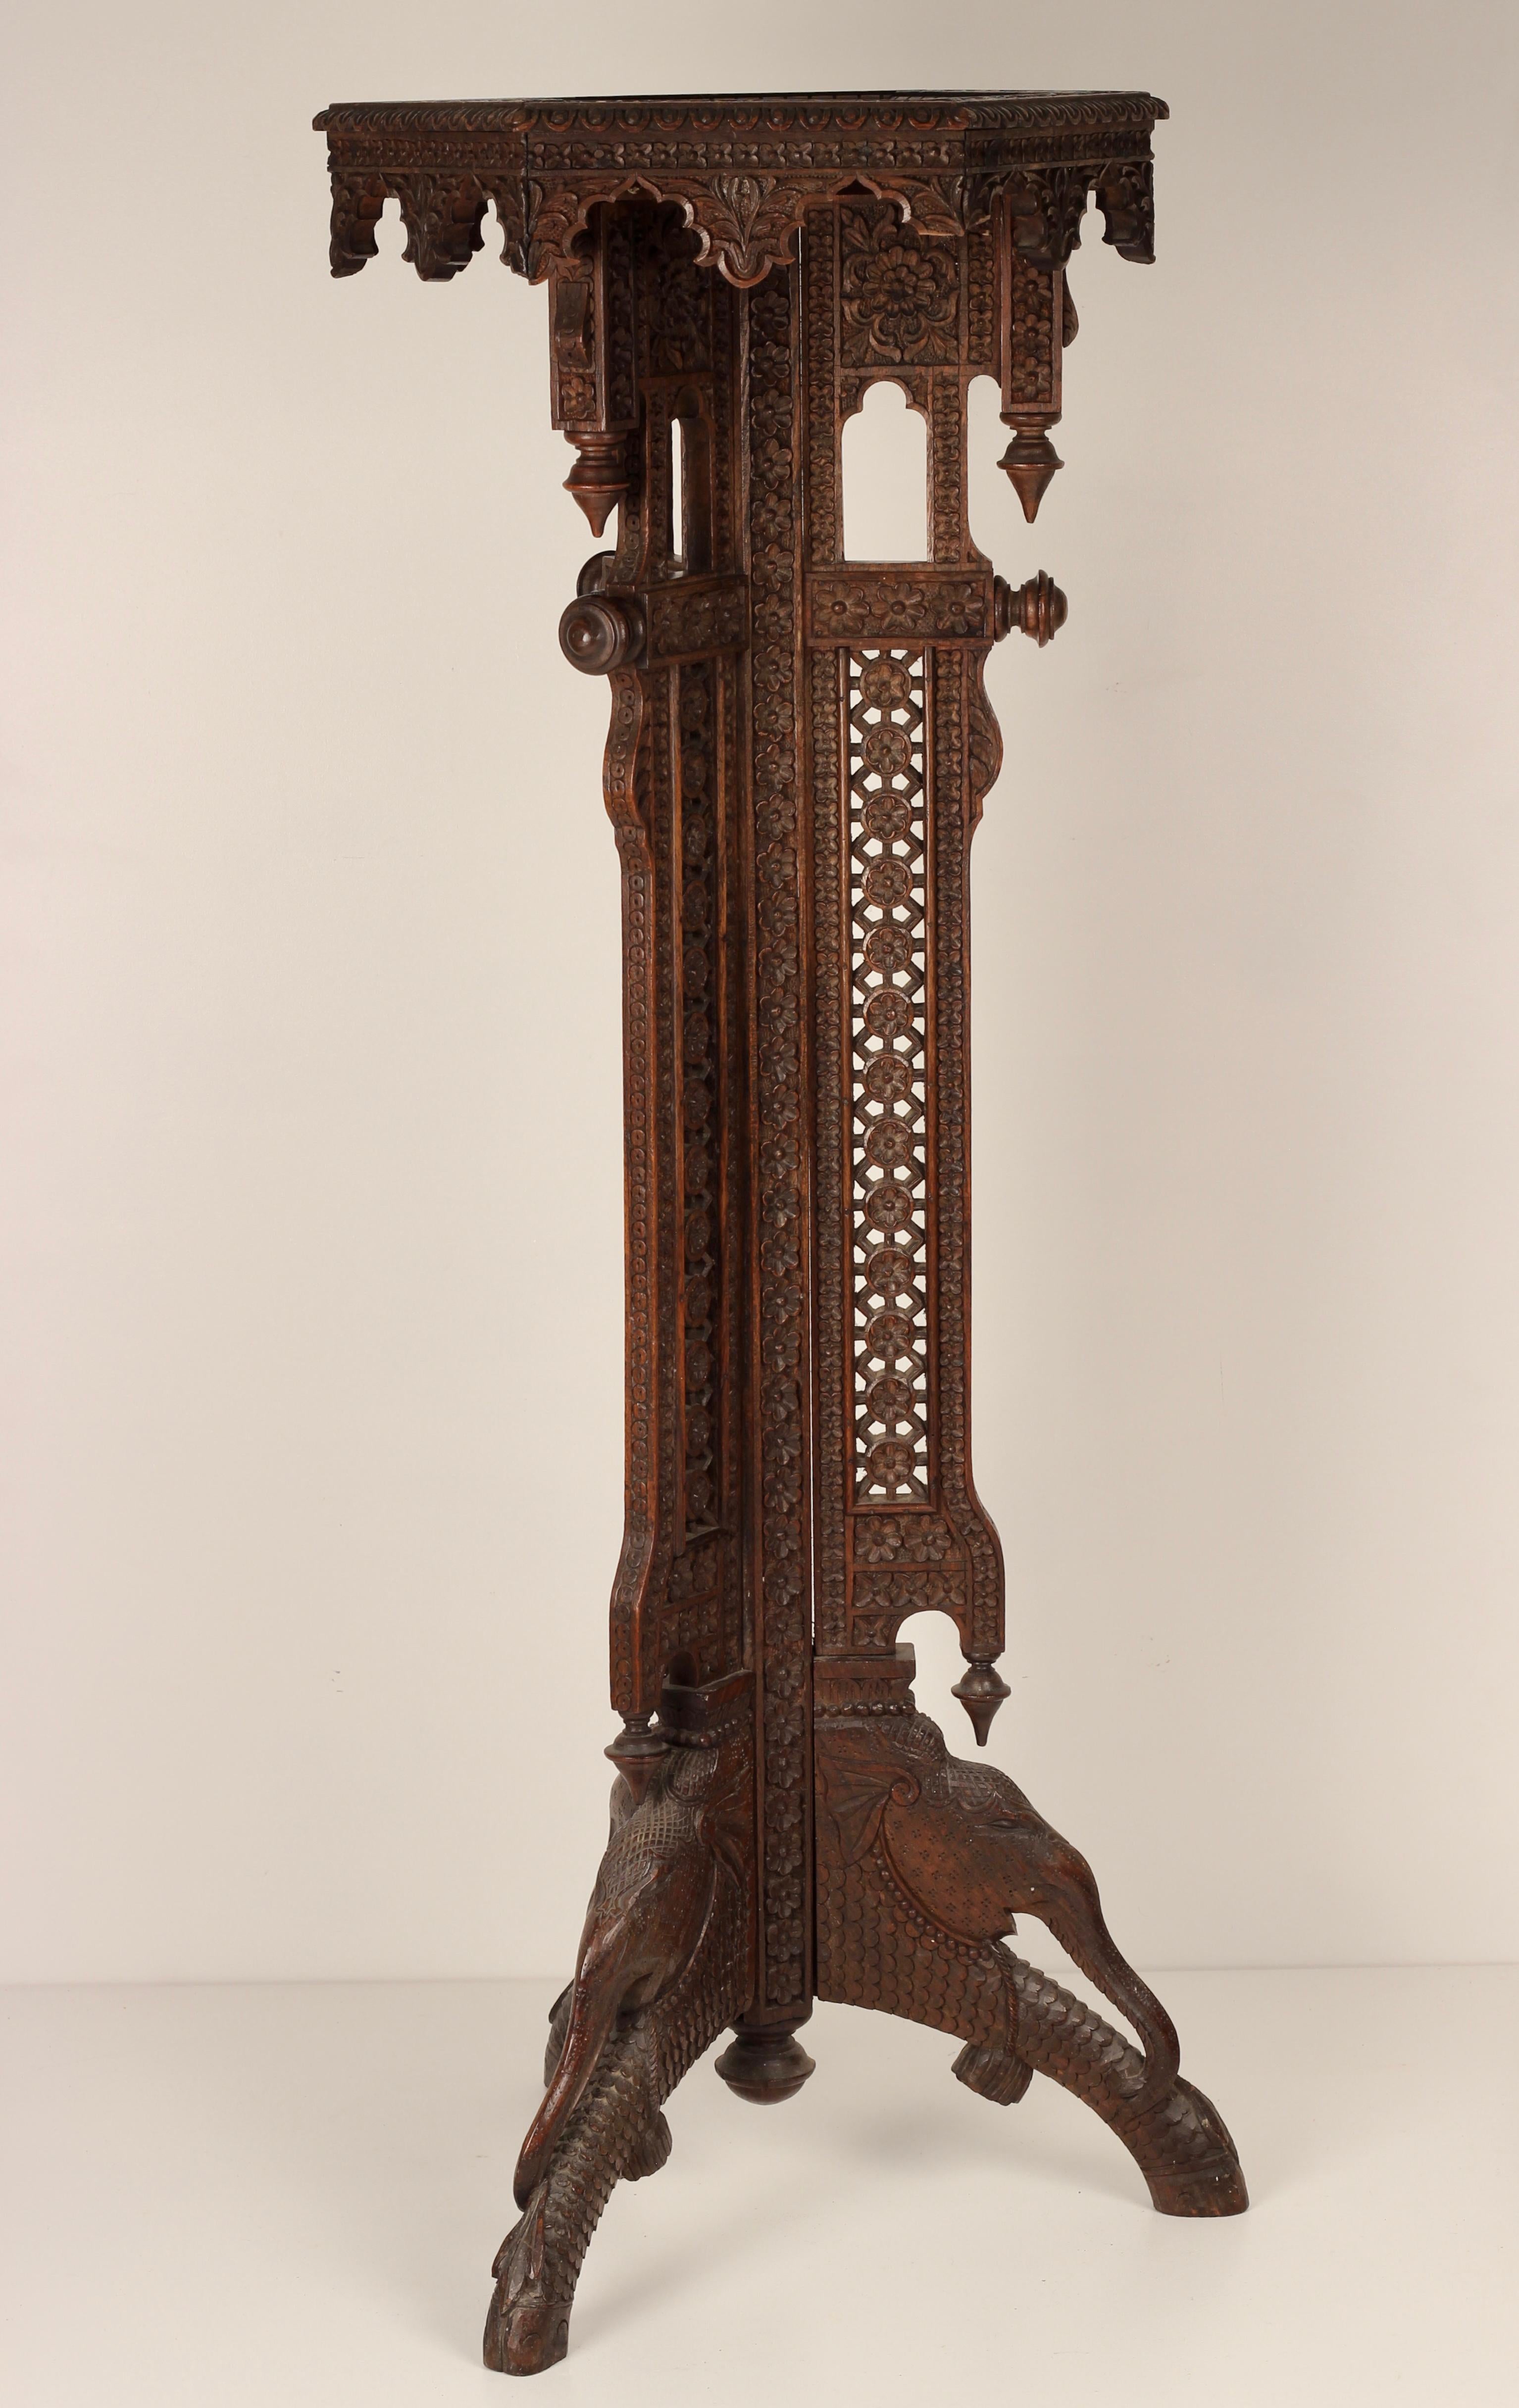 An incredibly detailed an ornate hand carved Torchere from India late 19th Century. Carved into the base of the piece are 4 Elephants shown in profile surrounded by a mass of botanical carved leaves and flower heads. Standing tall and elegant, this